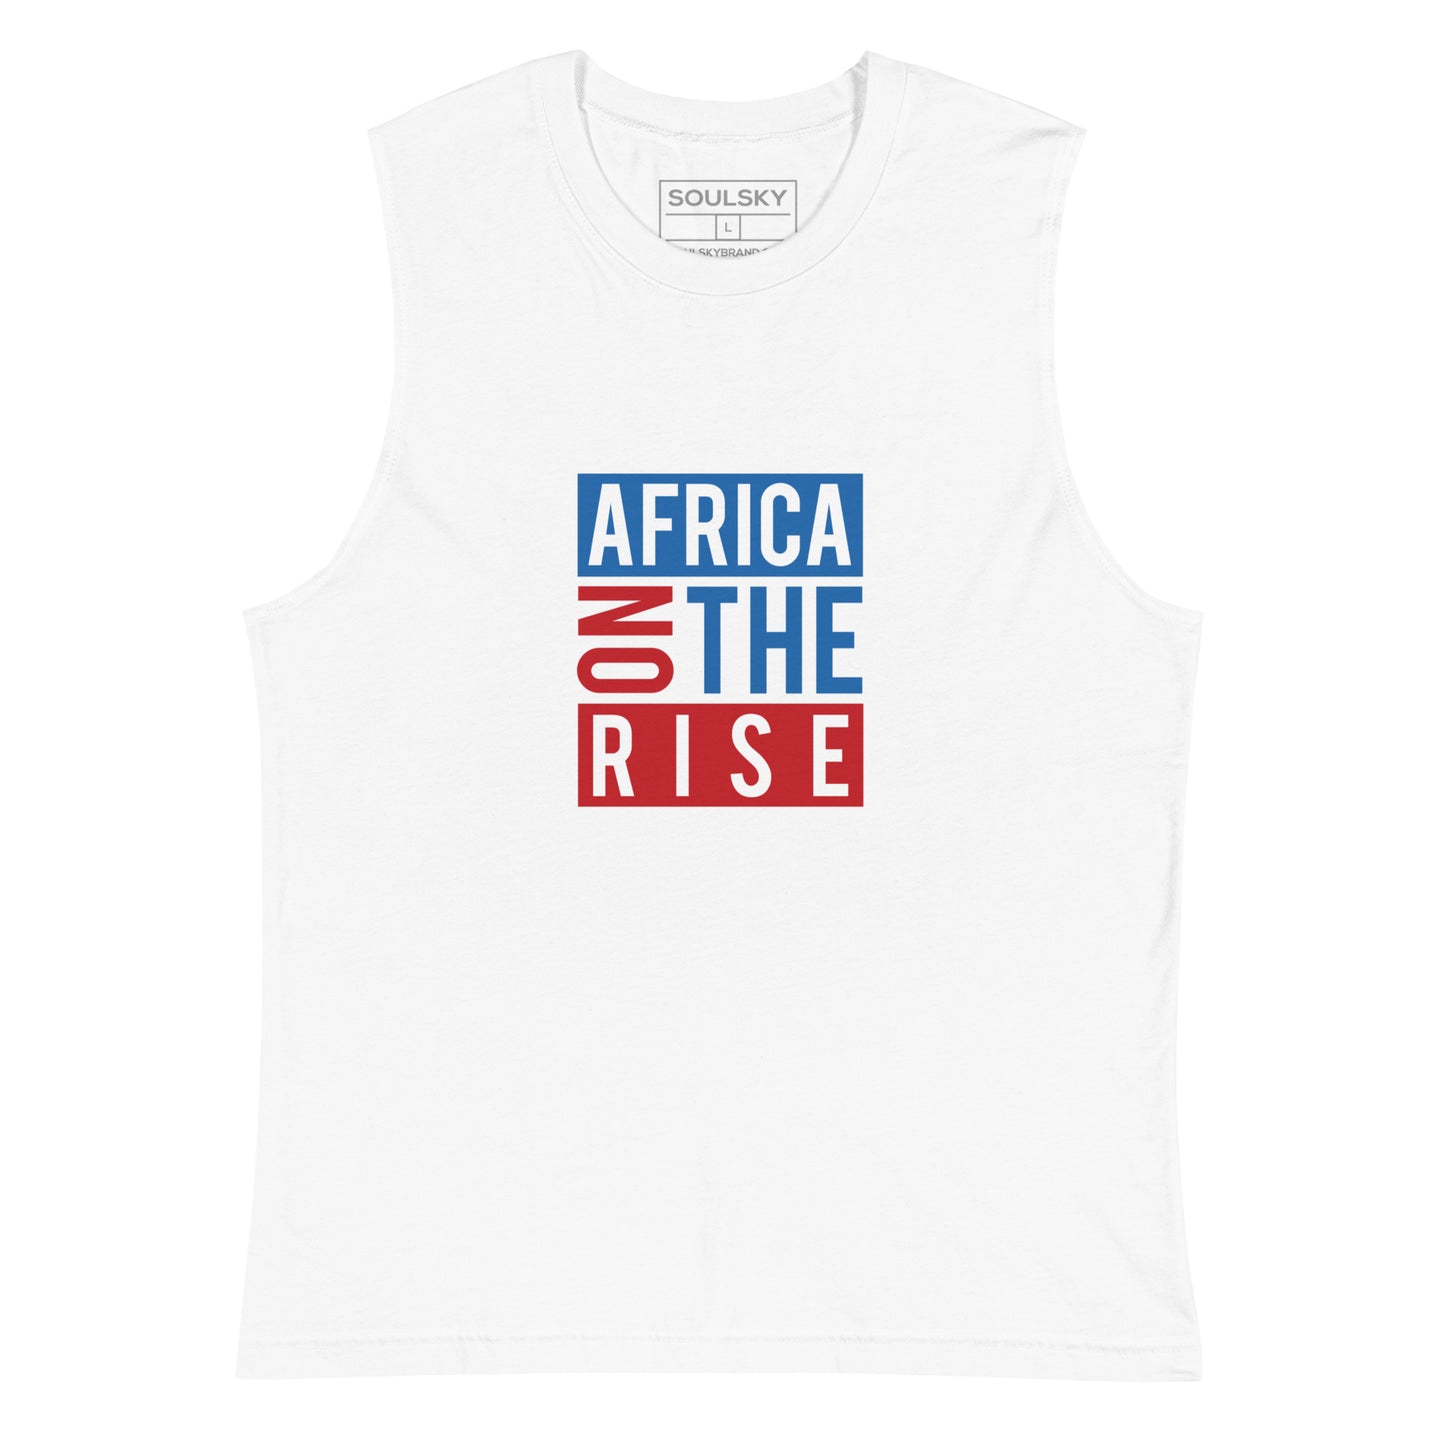 AFRICA ON THE RISE Muscle Shirt (White)